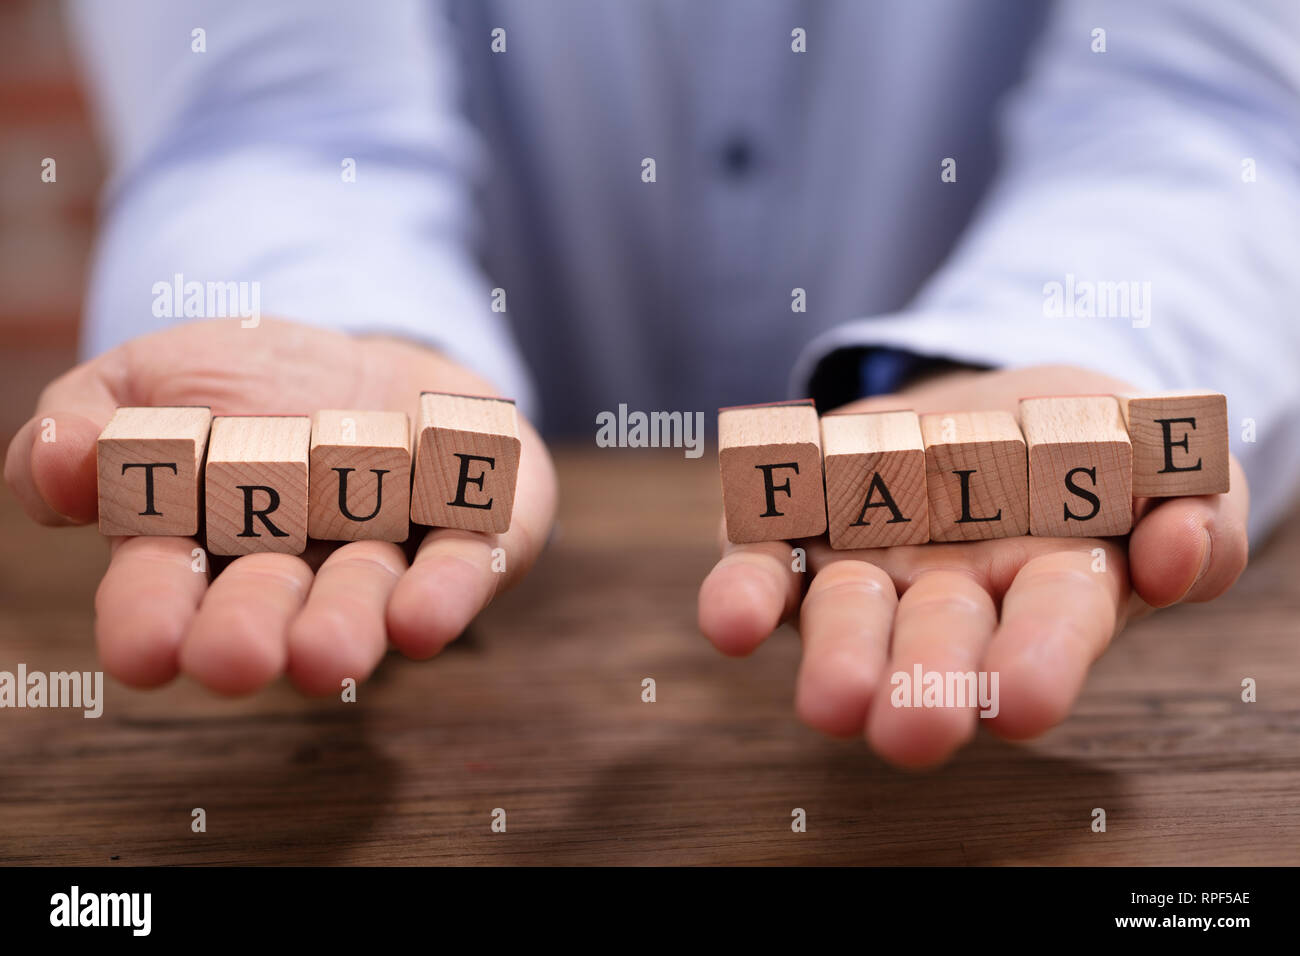 Close-up Businessman's Hand Holding True And False Blocks Over Wooden Desk Stock Photo